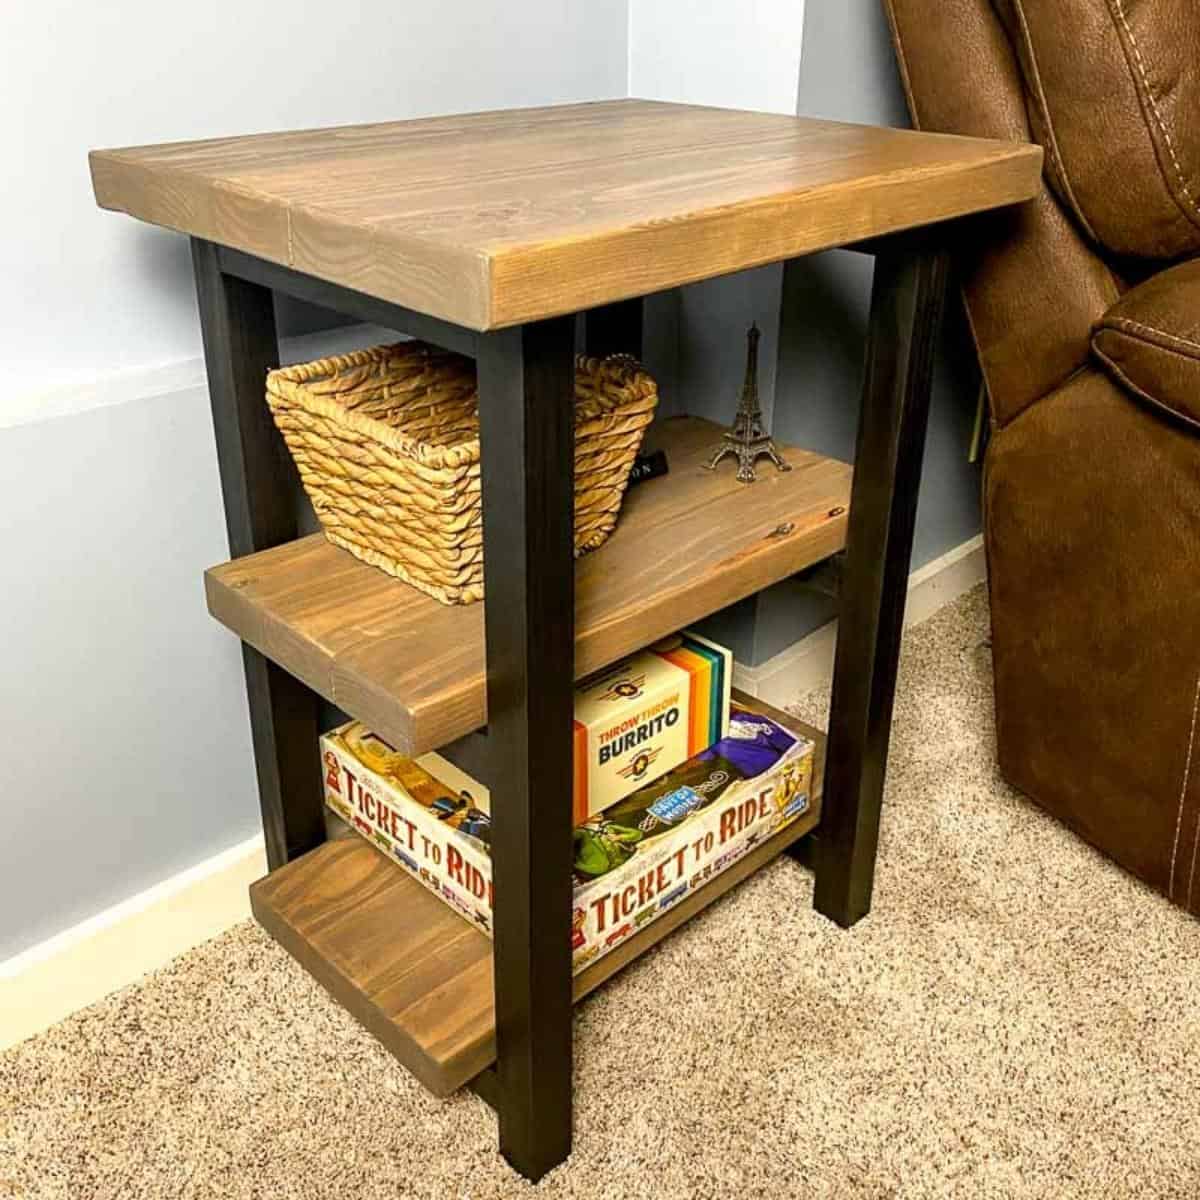 https://www.thehandymansdaughter.com/wp-content/uploads/2020/11/DIY-rustic-end-table-featured-image.jpeg